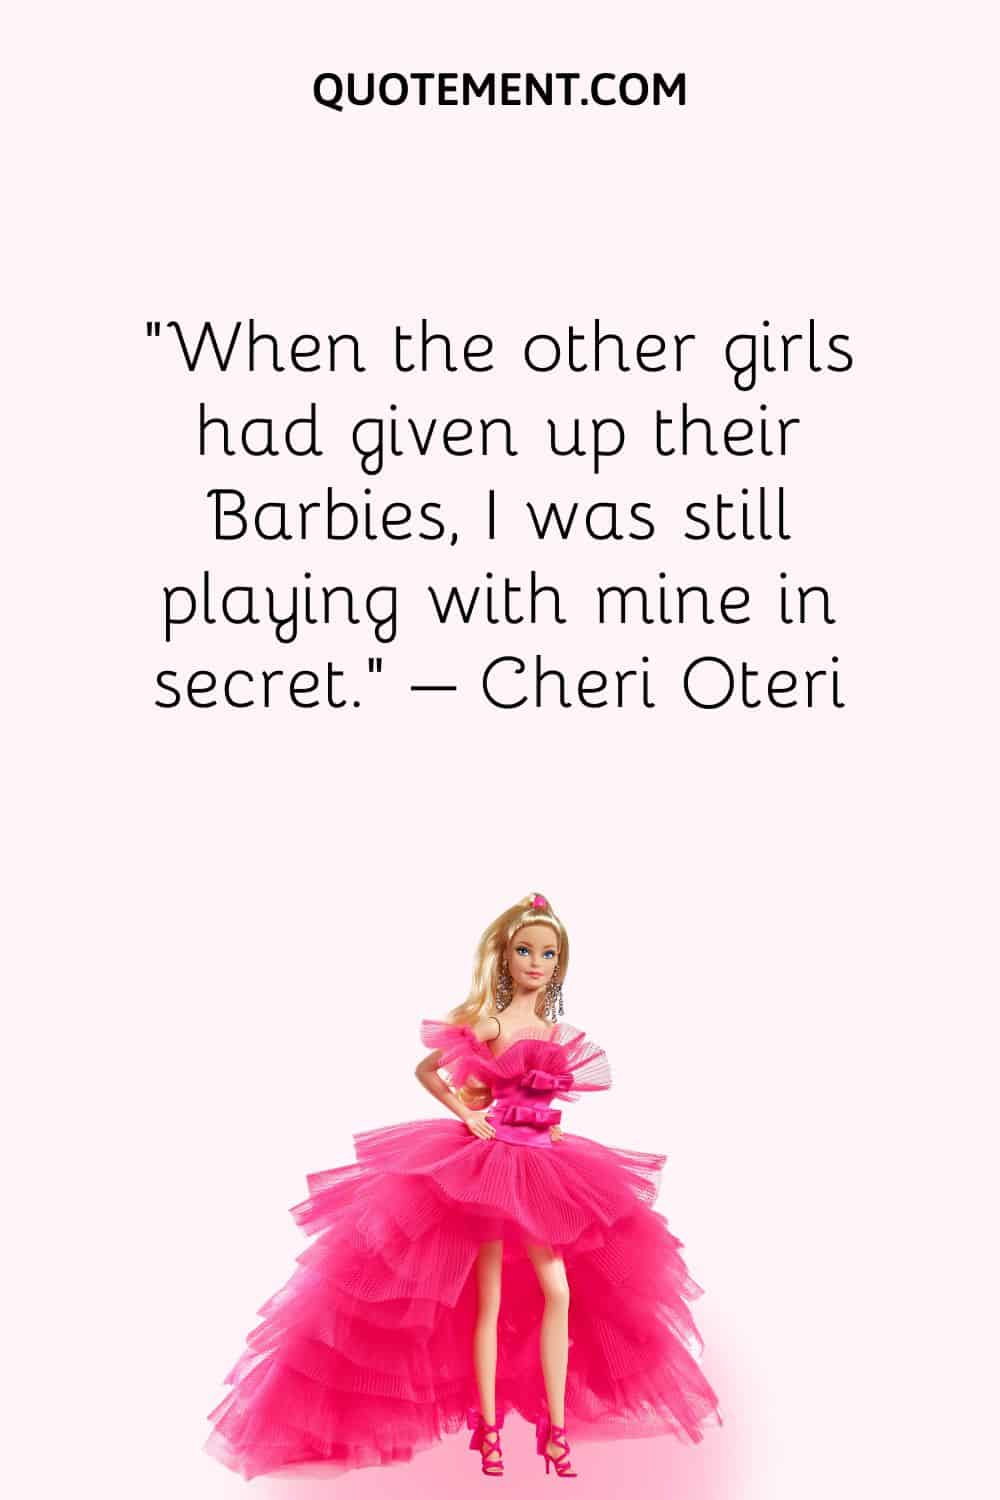 When the other girls had given up their Barbies, I was still playing with mine in secret